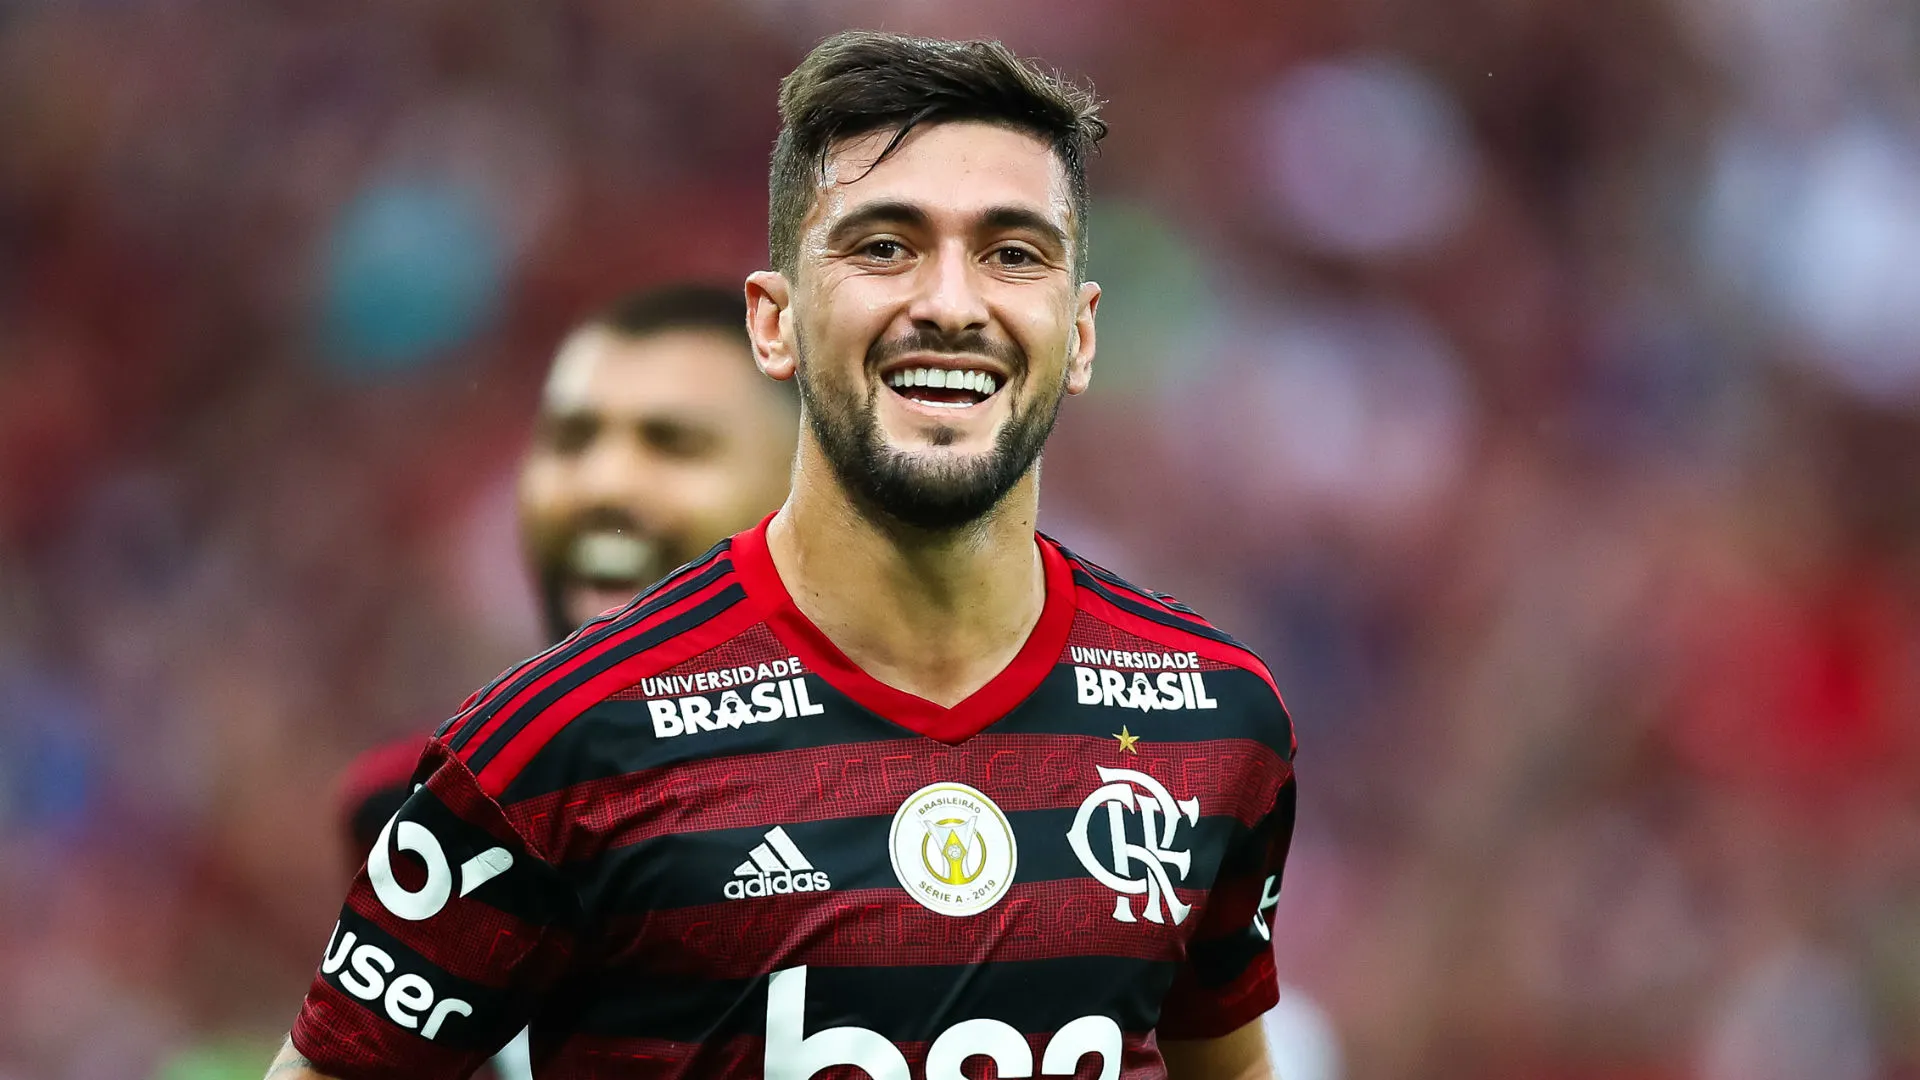 Arrascaeta's manager won't guarantee the player will stay at Flamengo, and his destination could be a big club in Europe. (Photo internet reproduction)